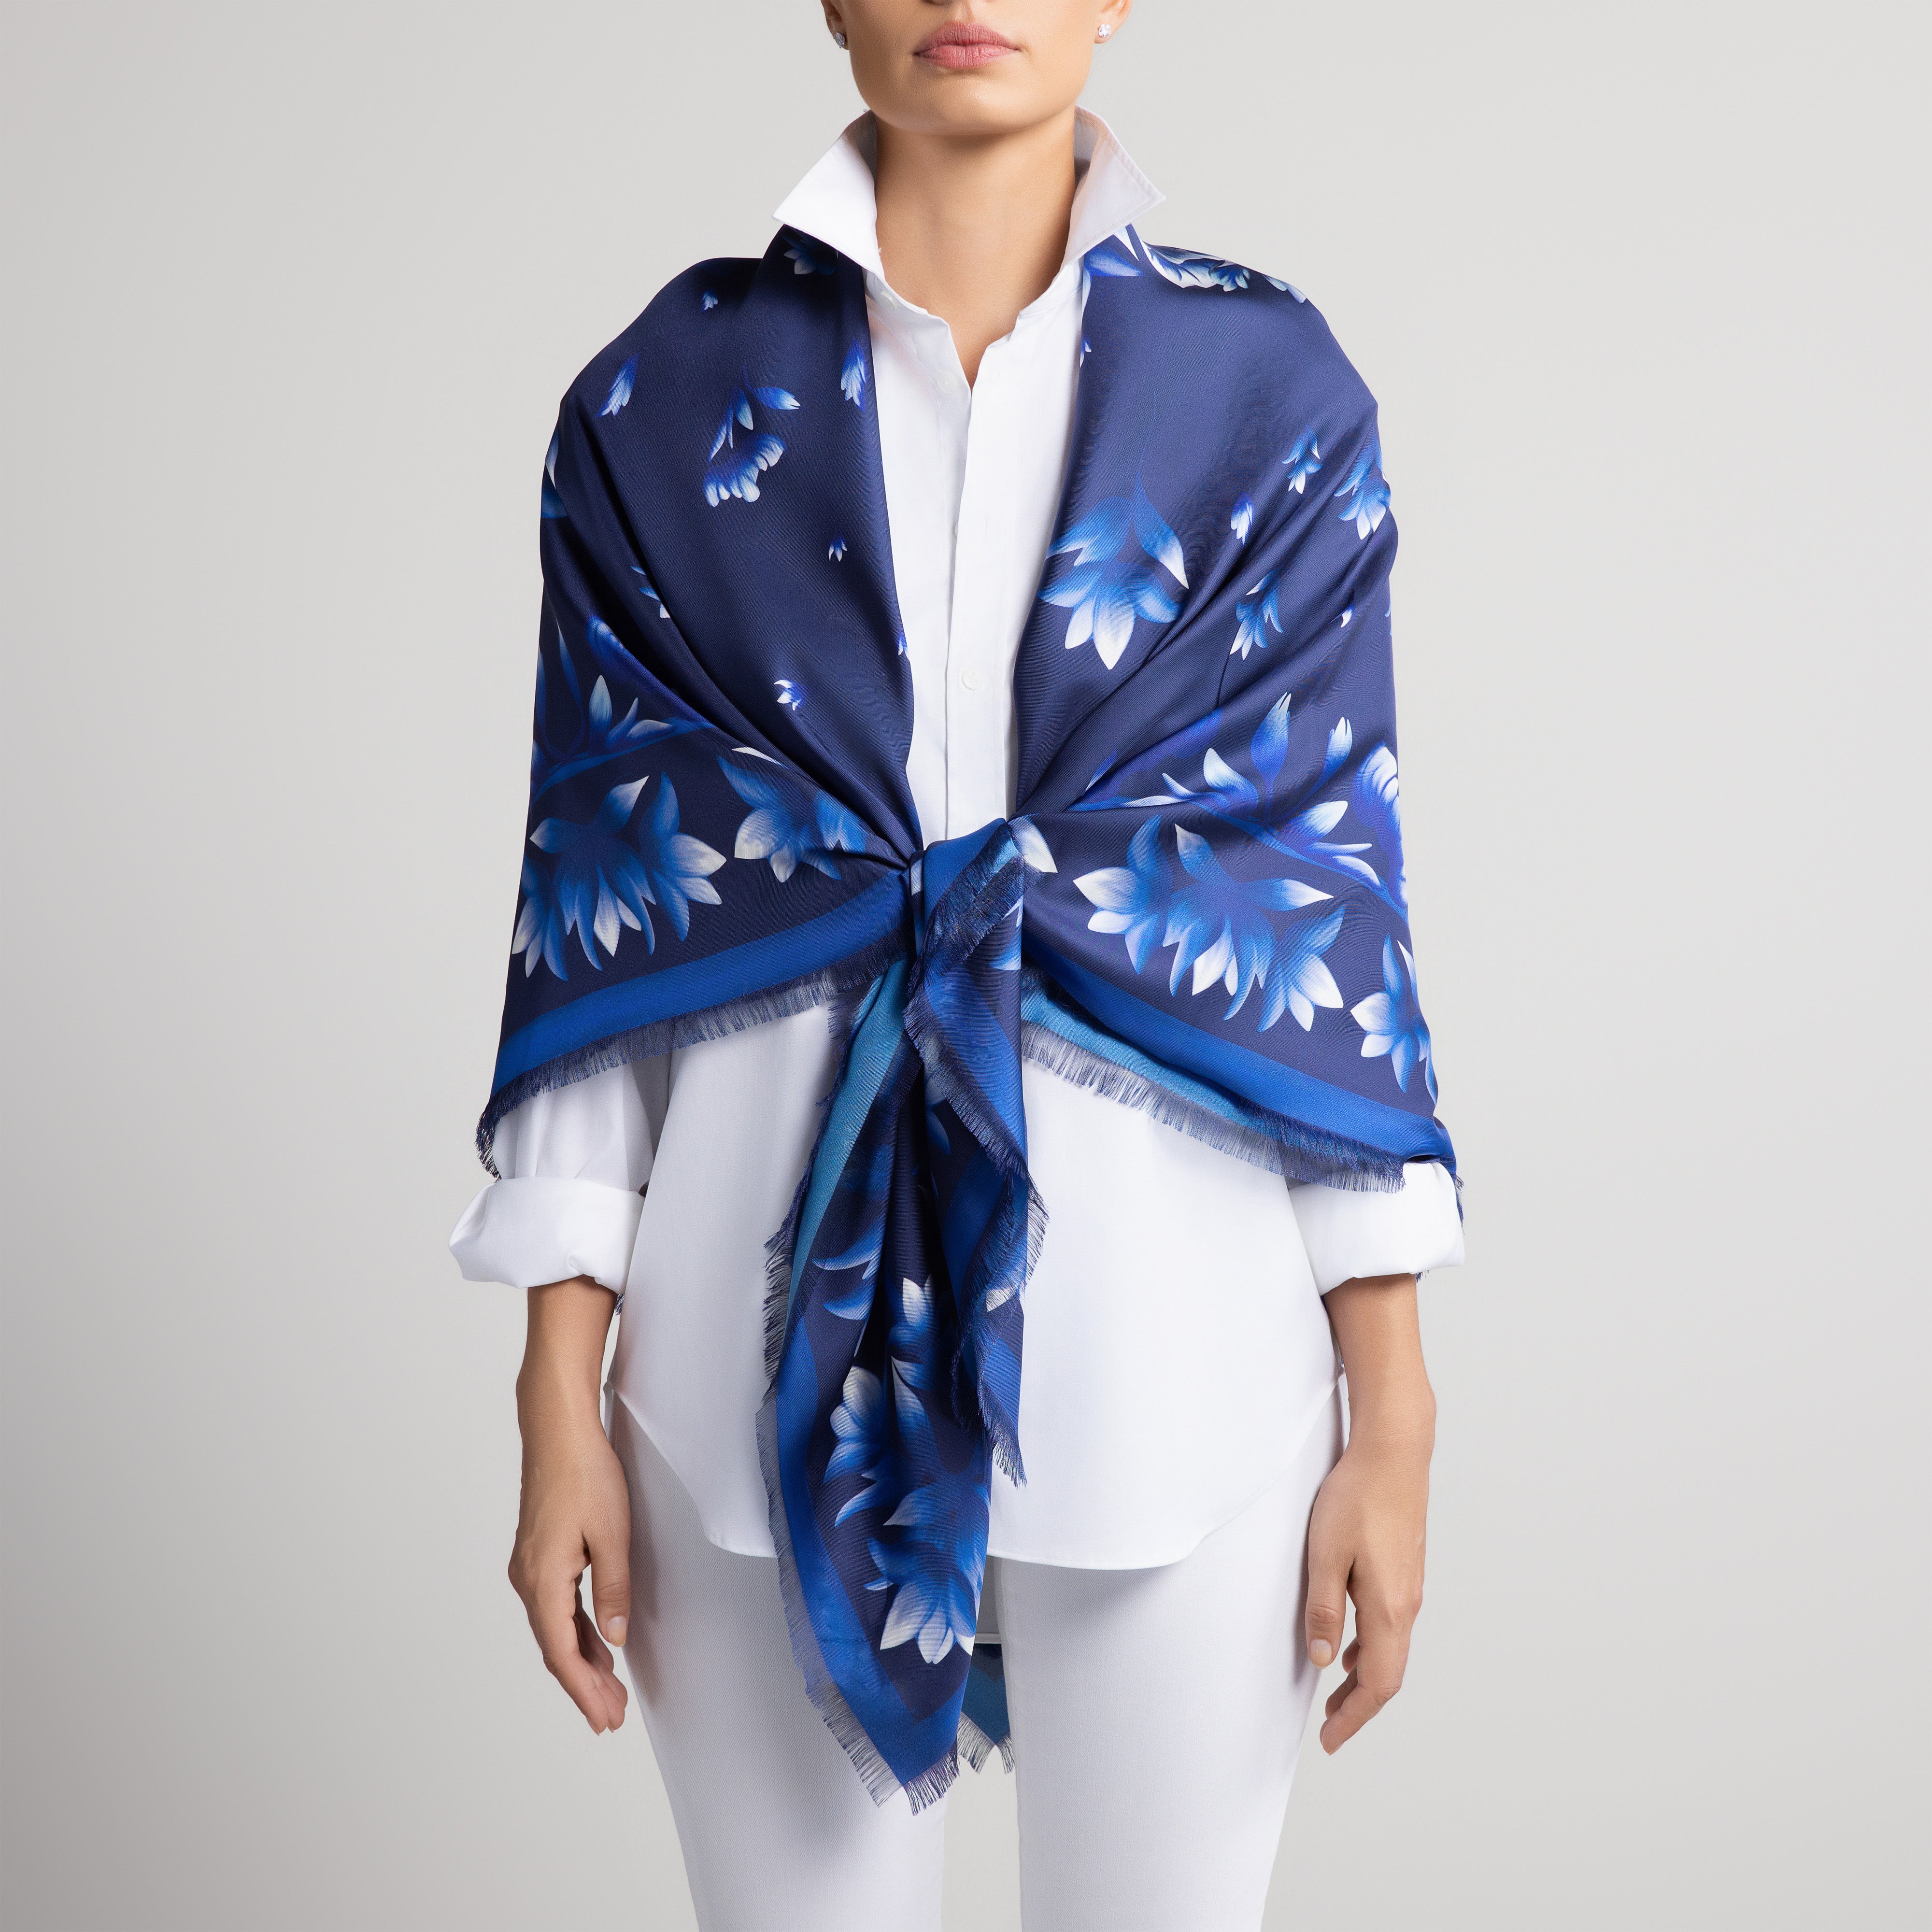 Azul Grande Silk Scarf in Navy Blue with Hand-Feathered Edges